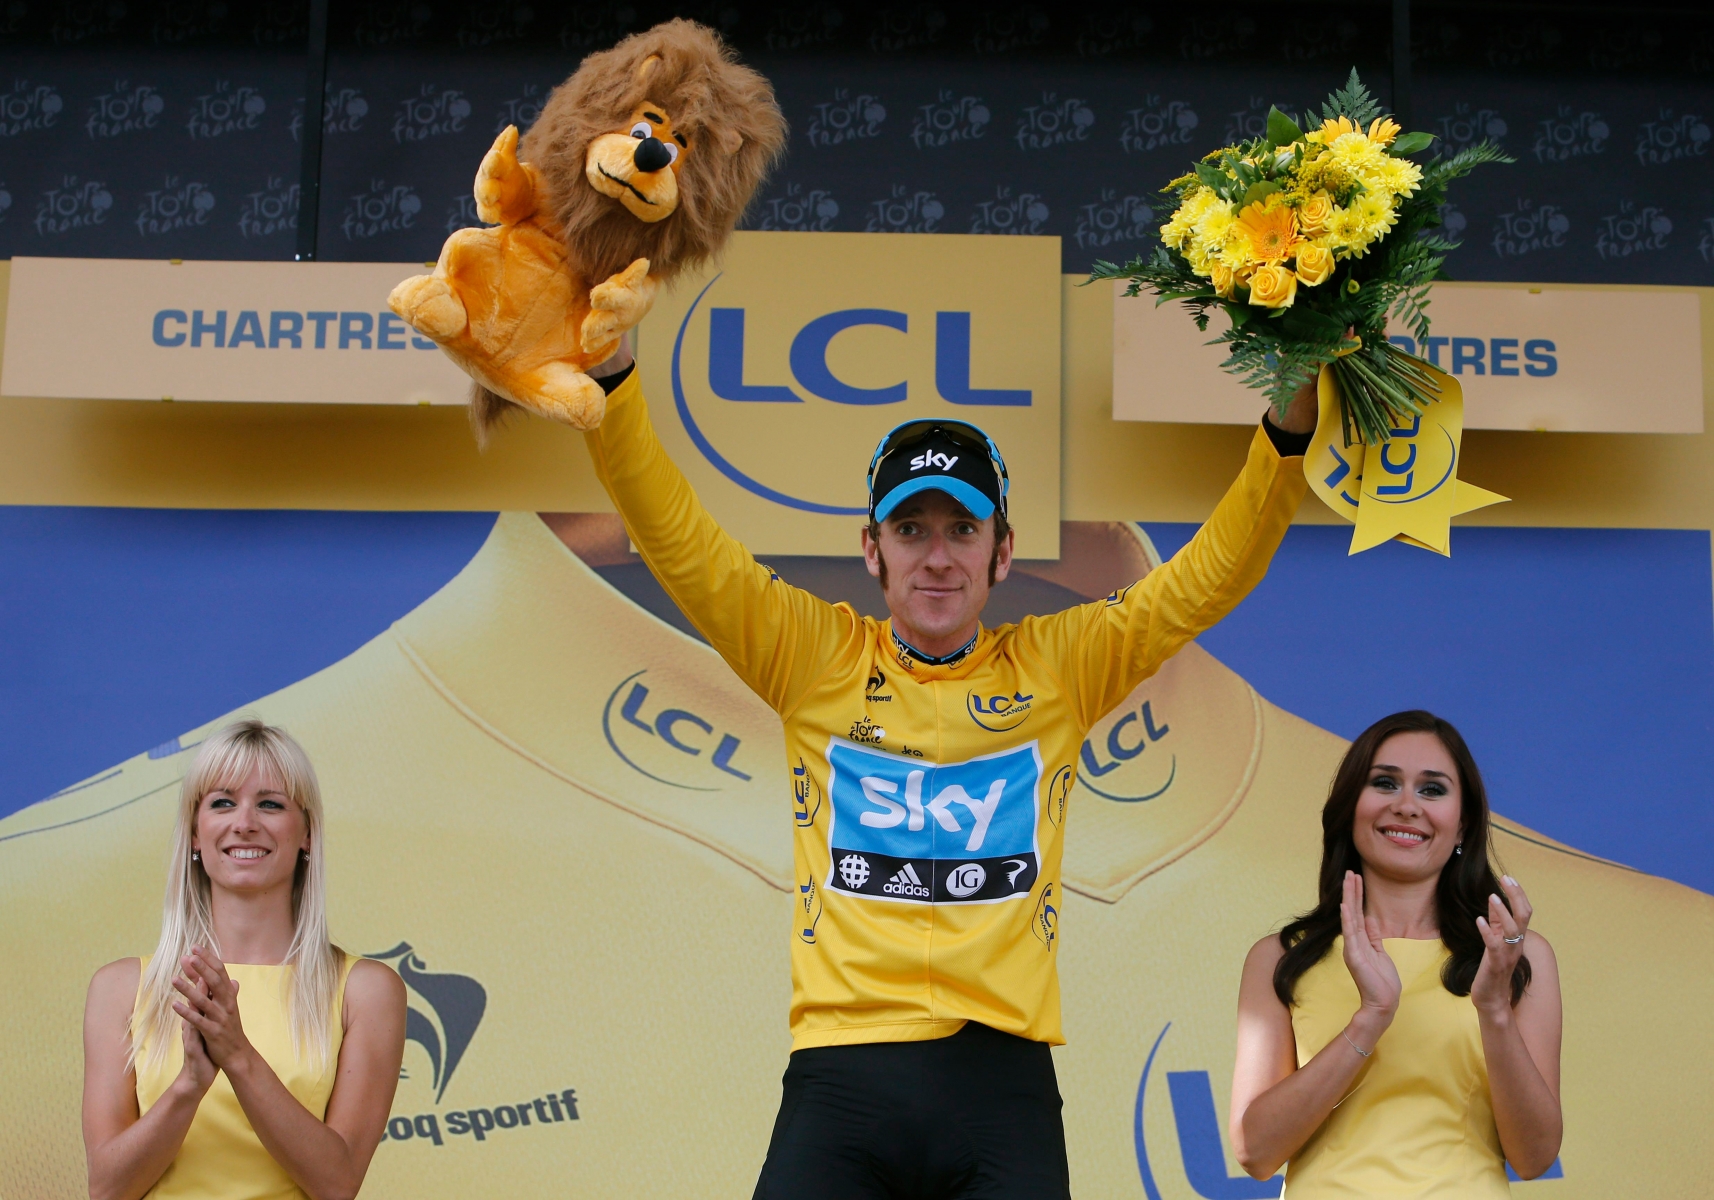 File - In this Saturday, July 21, 2012 file photo, Bradley Wiggins of Britain, wearing the overall leader's yellow jersey, bows to cheering spectators on the podium of the 19th stage of the the Tour de France cycling race, an individual time trial over 53.5 kilometers (33.2 miles) with start in Bonneval and finish in Chartres, France. Bradley Wiggins announced his retirement from cycling on Wednesday, Dec. 28, 2016 ending an illustrious career in which he won a British-record eight Olympic medals and became his countryÄôs first winner of the Tour de France. (AP Photo/Laurent Cipriani) Cycling Wiggins Retires